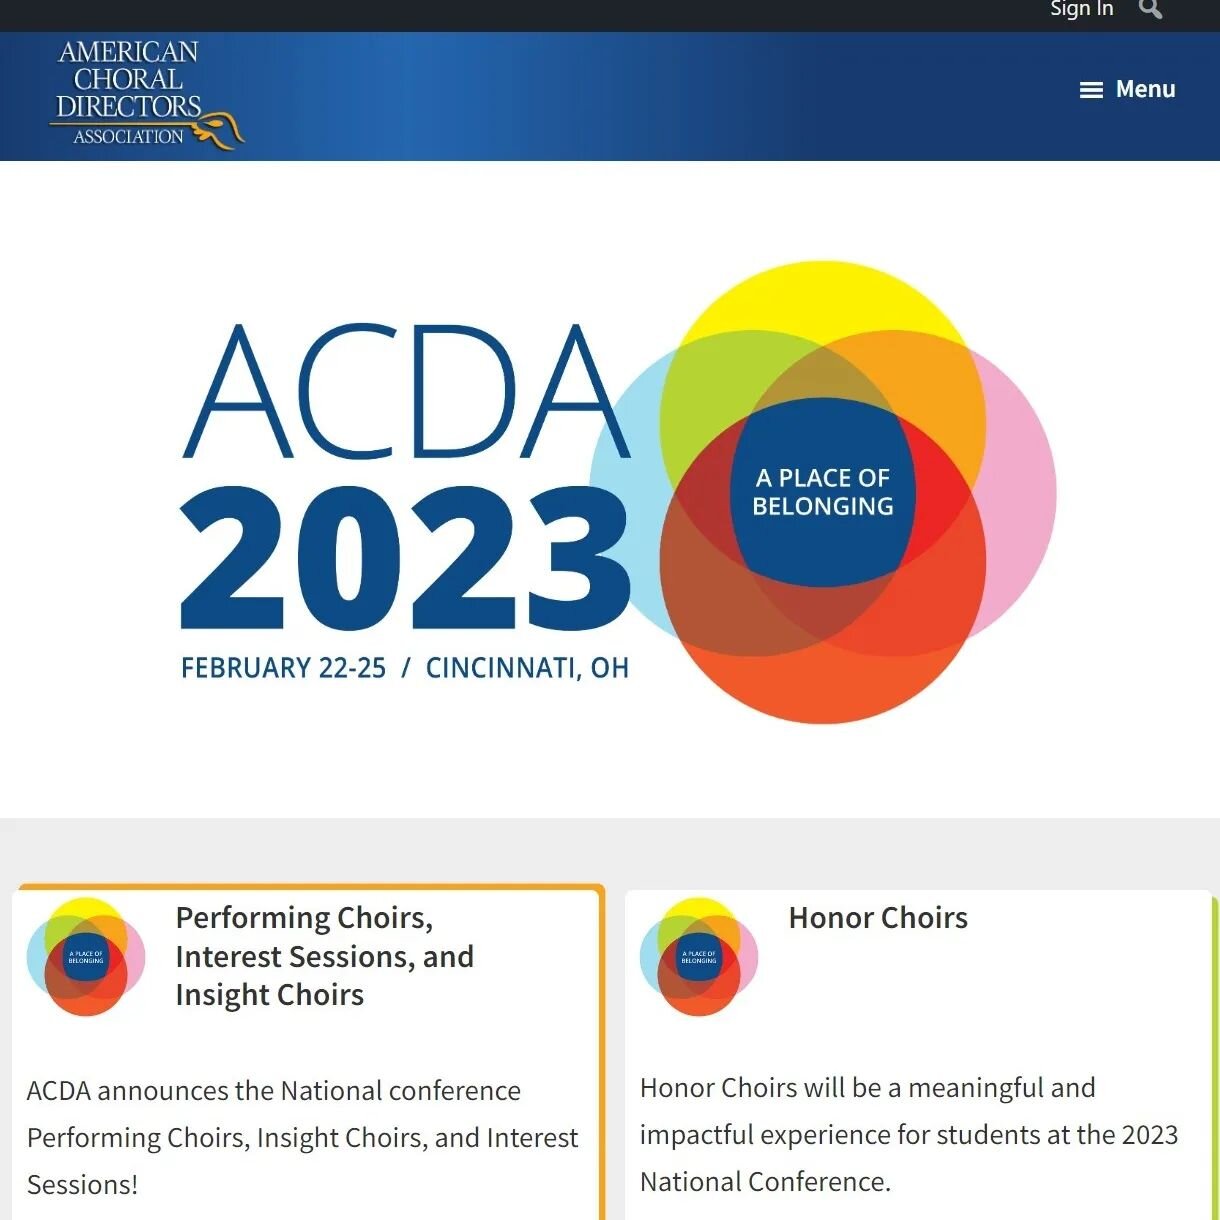 I am so unbelievably excited to announce that I have been selected to present an interest session on transgender inclusivity at the National ACDA Convention this Spring in Cincinnati! I can't wait!

@acda_nation @acdawestern @uscthorntonacda @uscthor